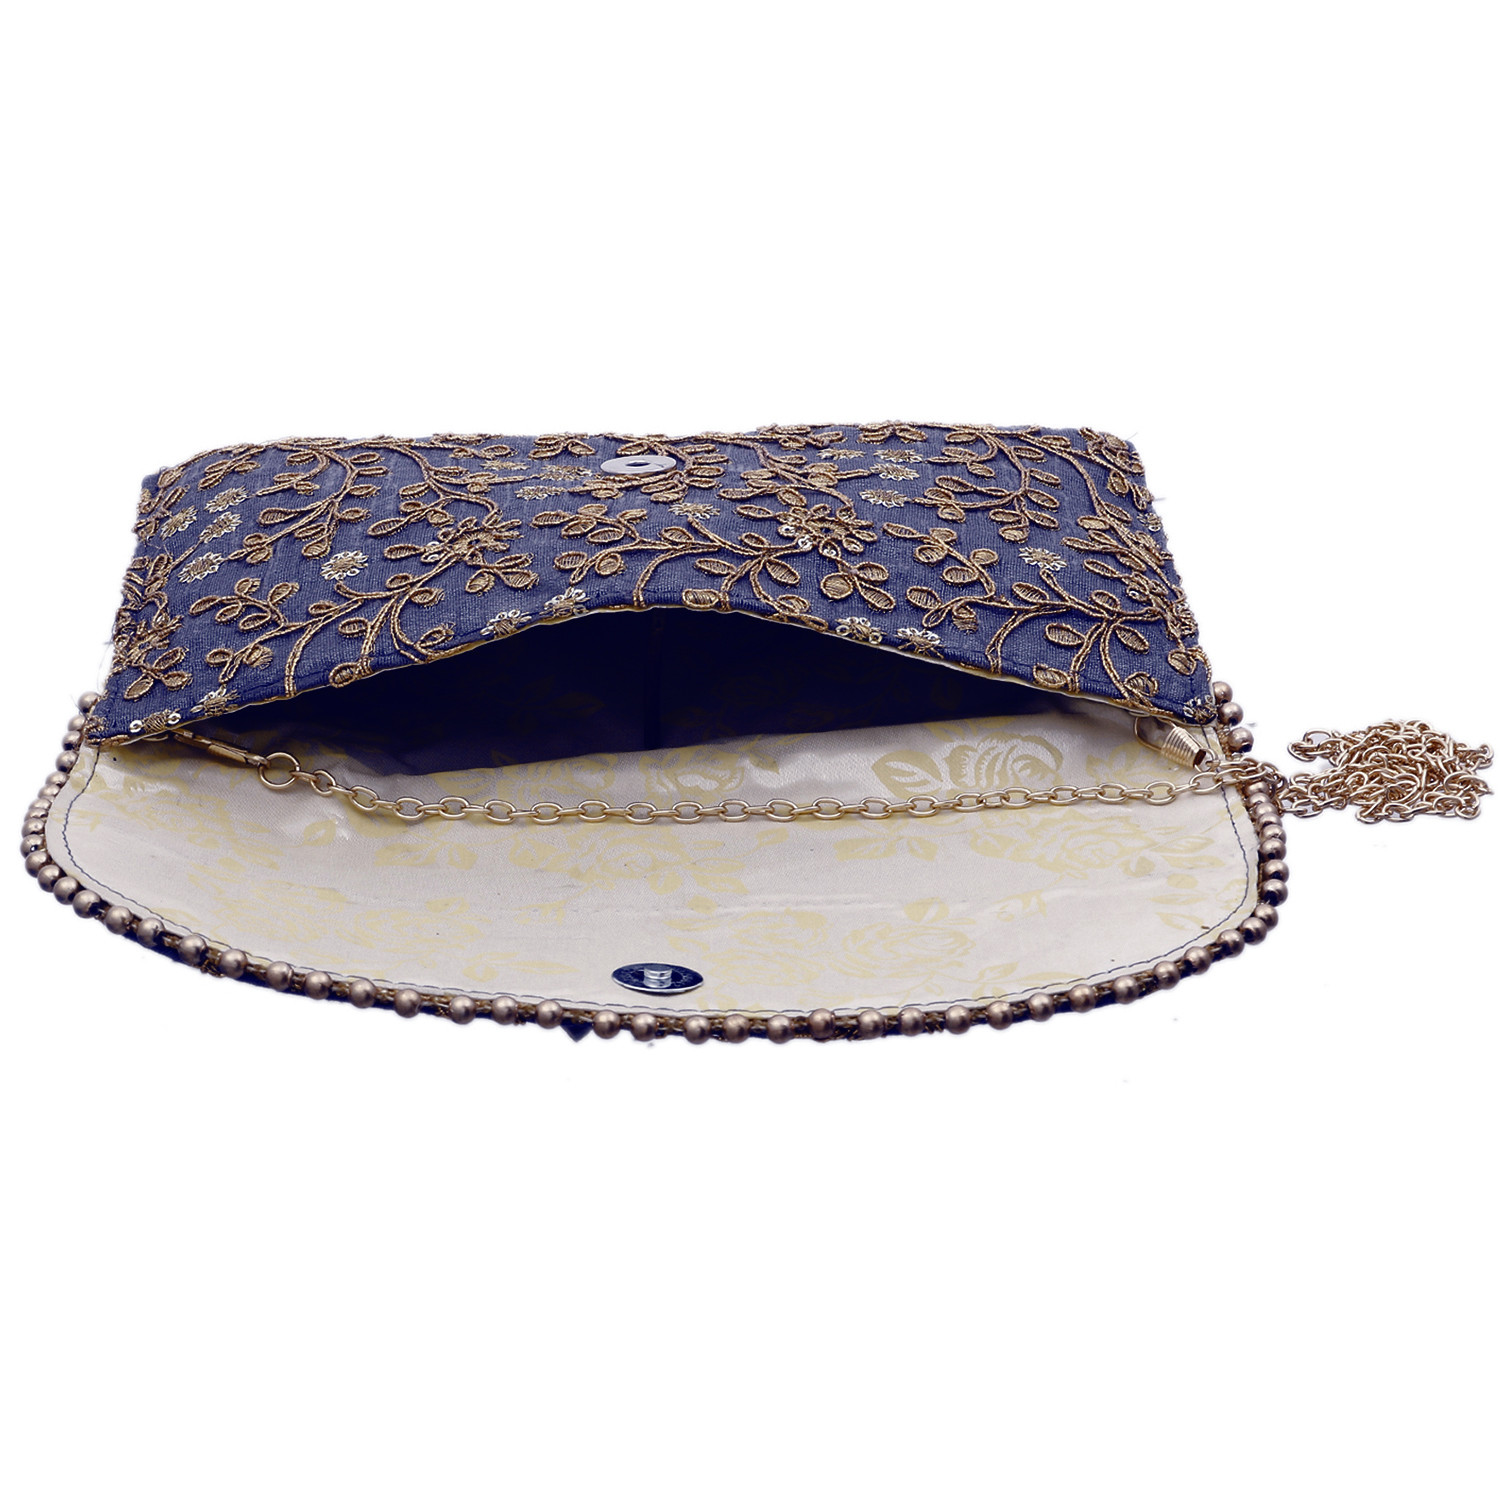 Kuber Industries Embroidery Golden Pearl Border Clutch|Hand Purse & Pearls Handle With Magnetic Lock For Woman,Girls (Blue)